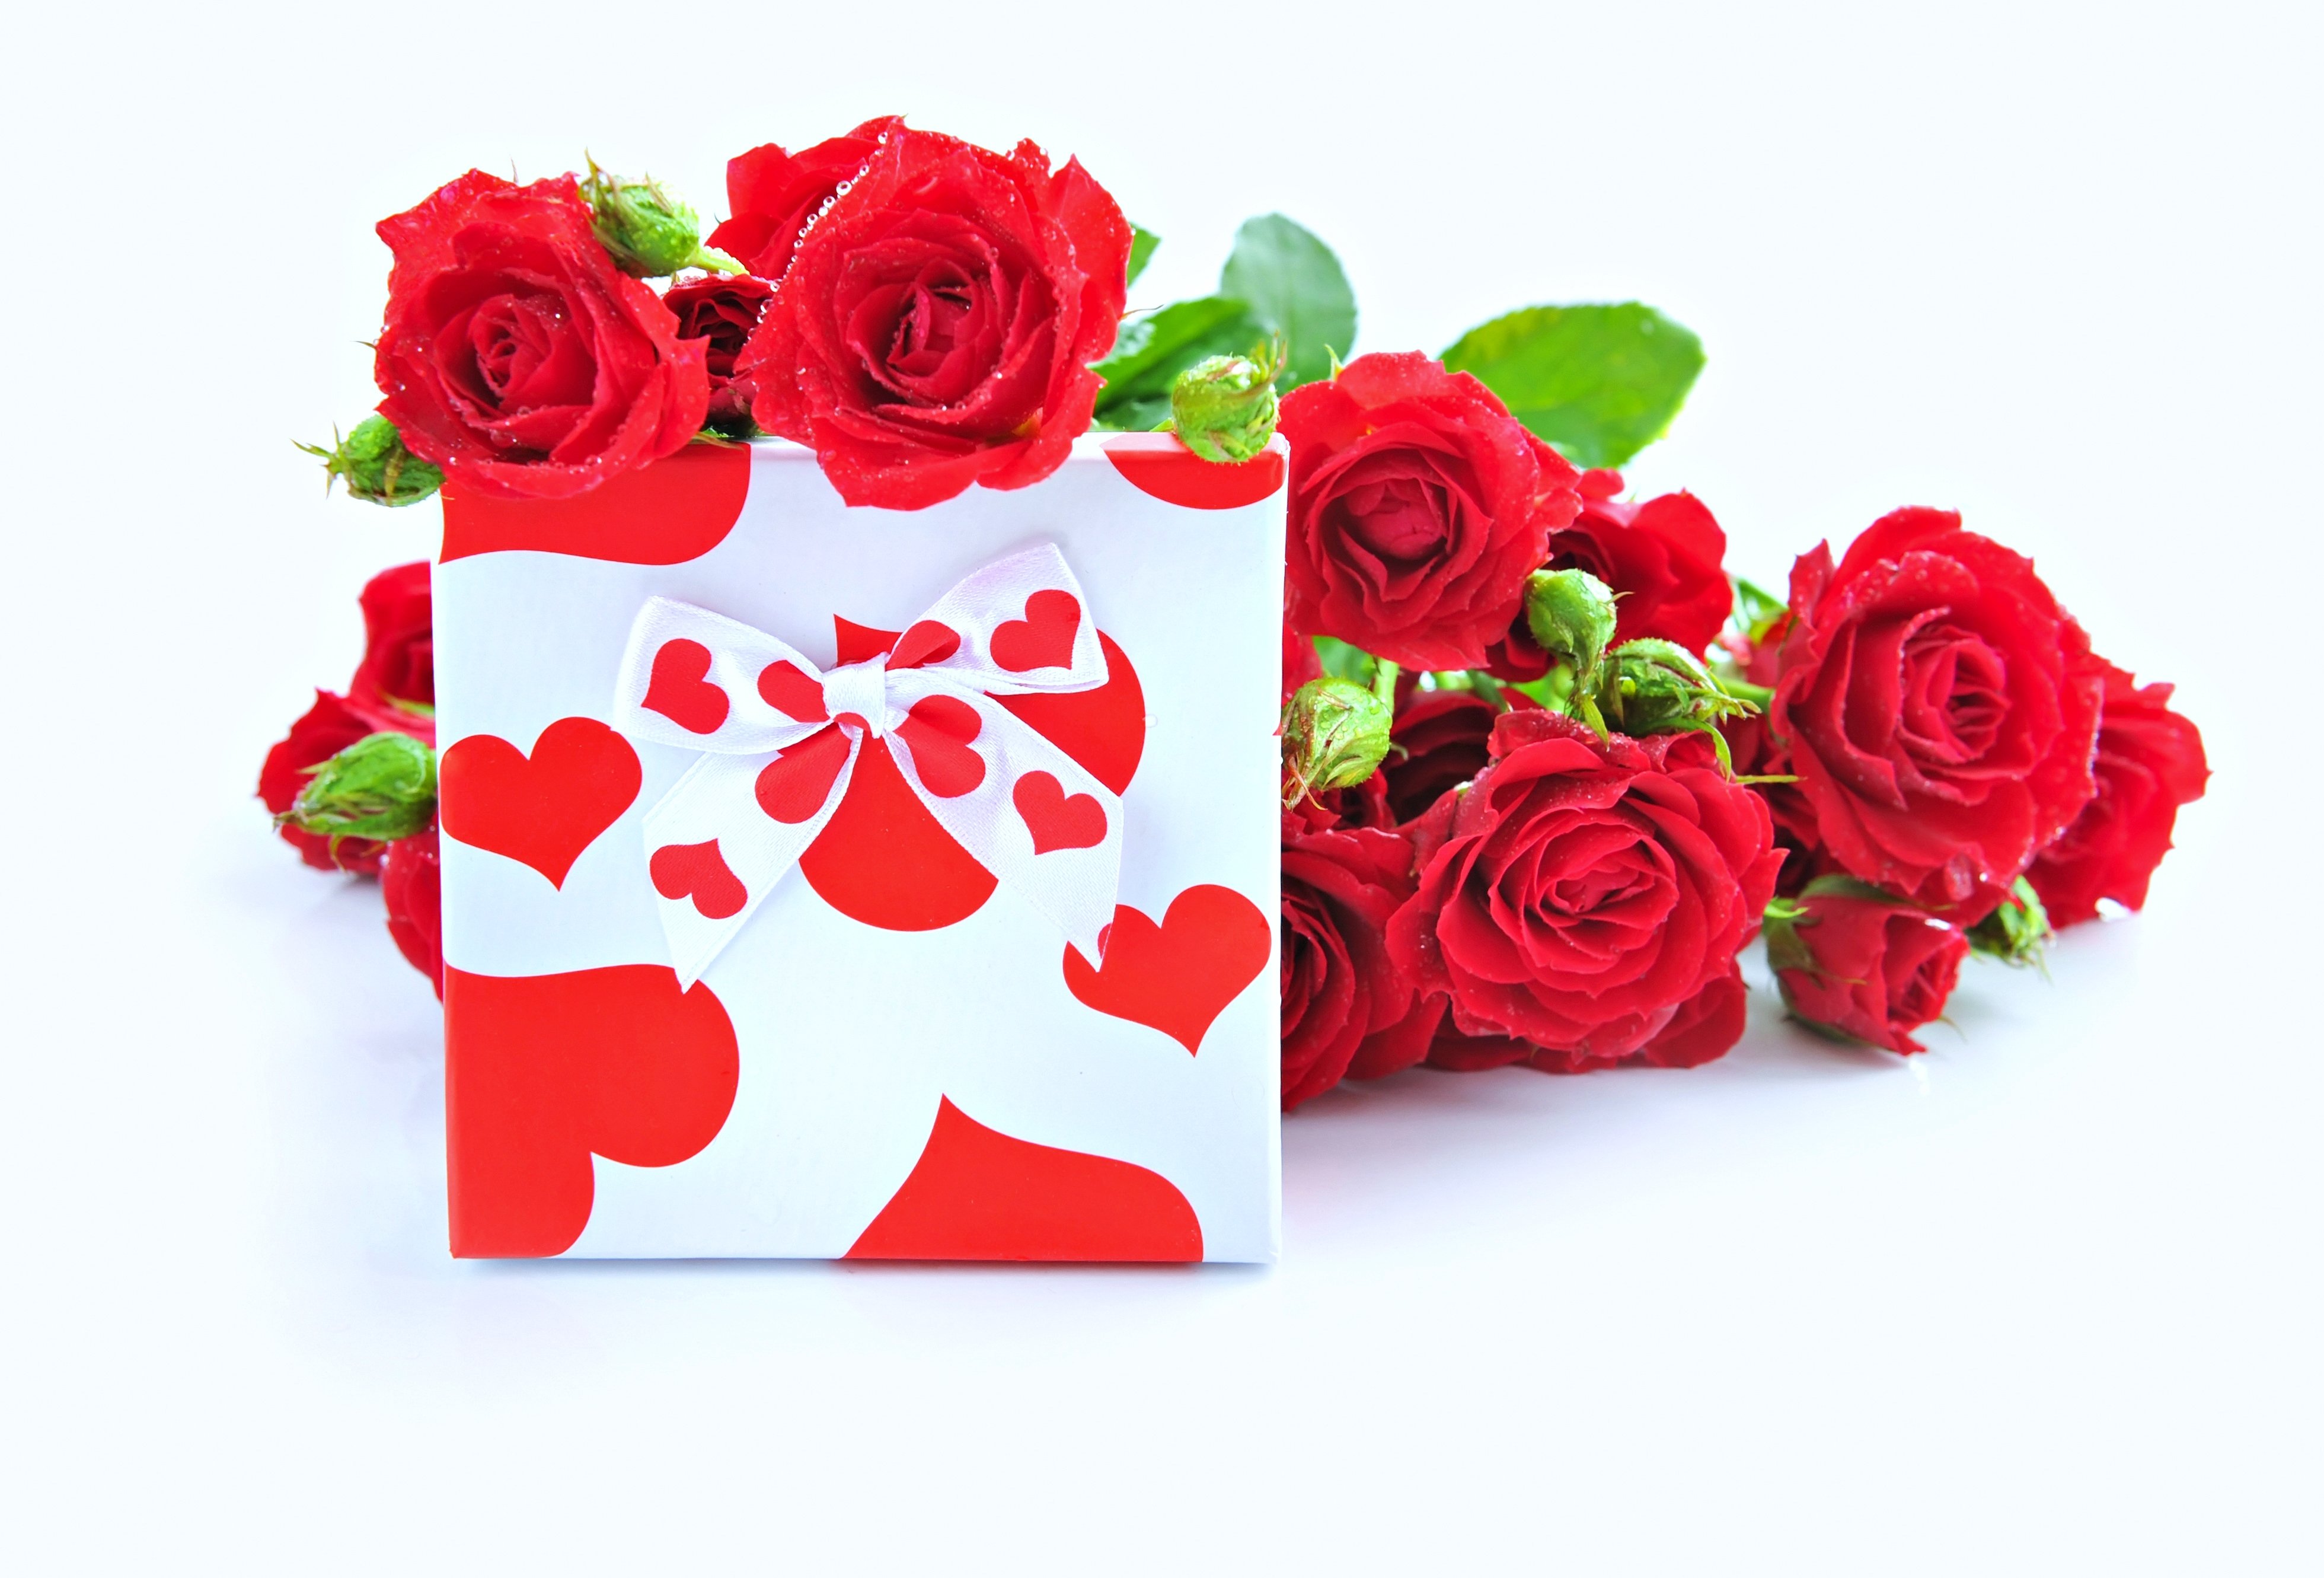 roses, Flowers, Love, For, Gift, Bouquet, Romance, Emotions, Life, Wife, Happy Wallpaper